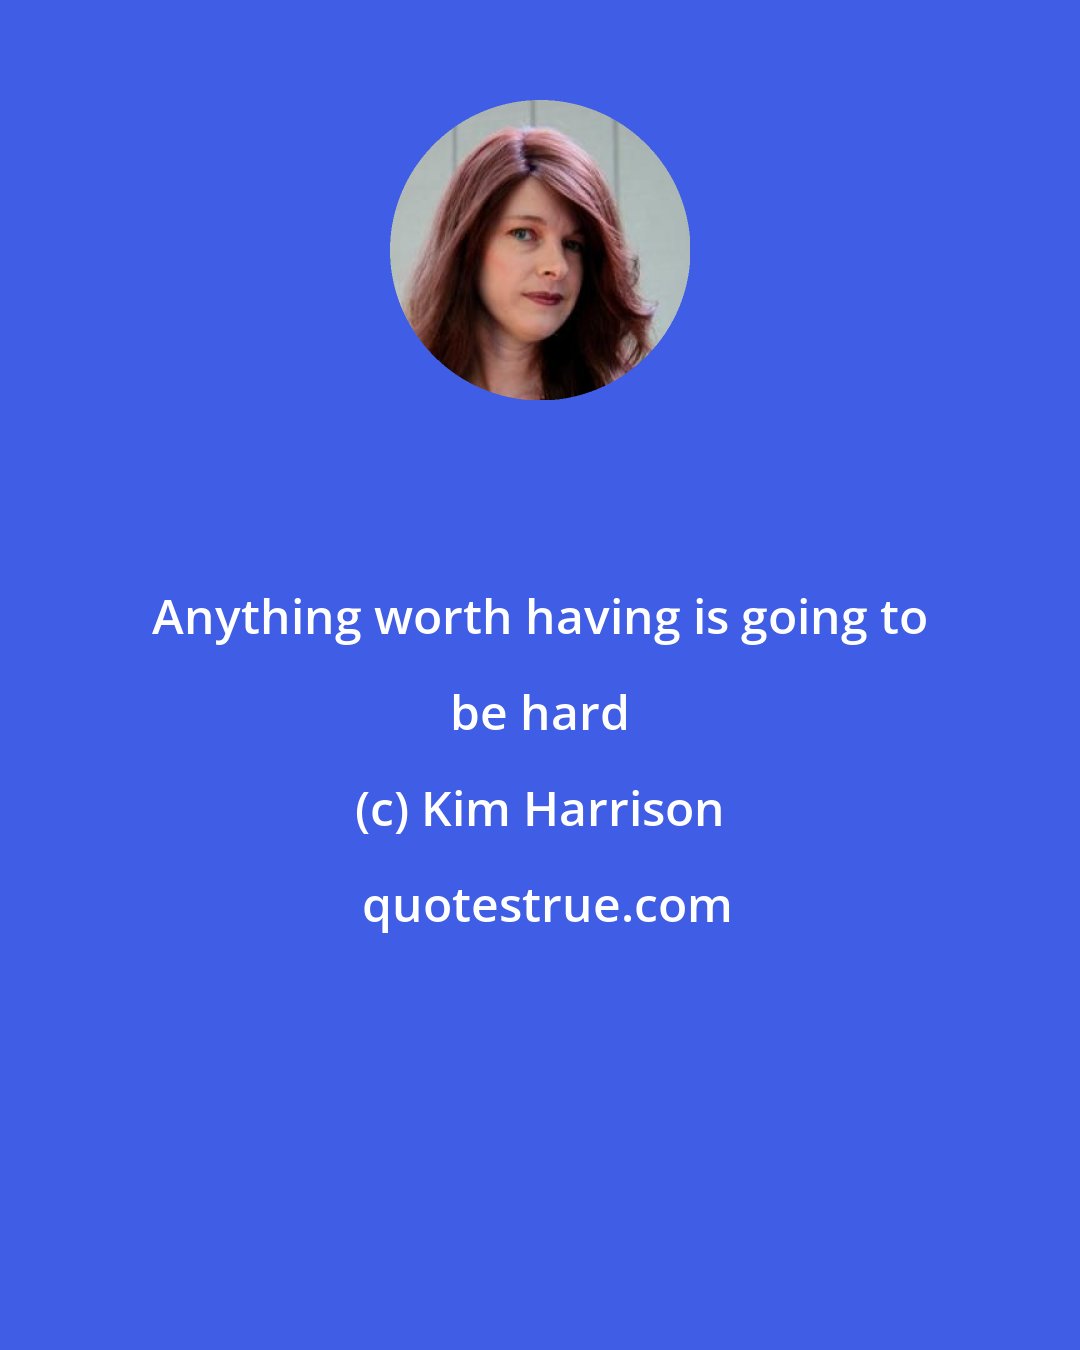 Kim Harrison: Anything worth having is going to be hard